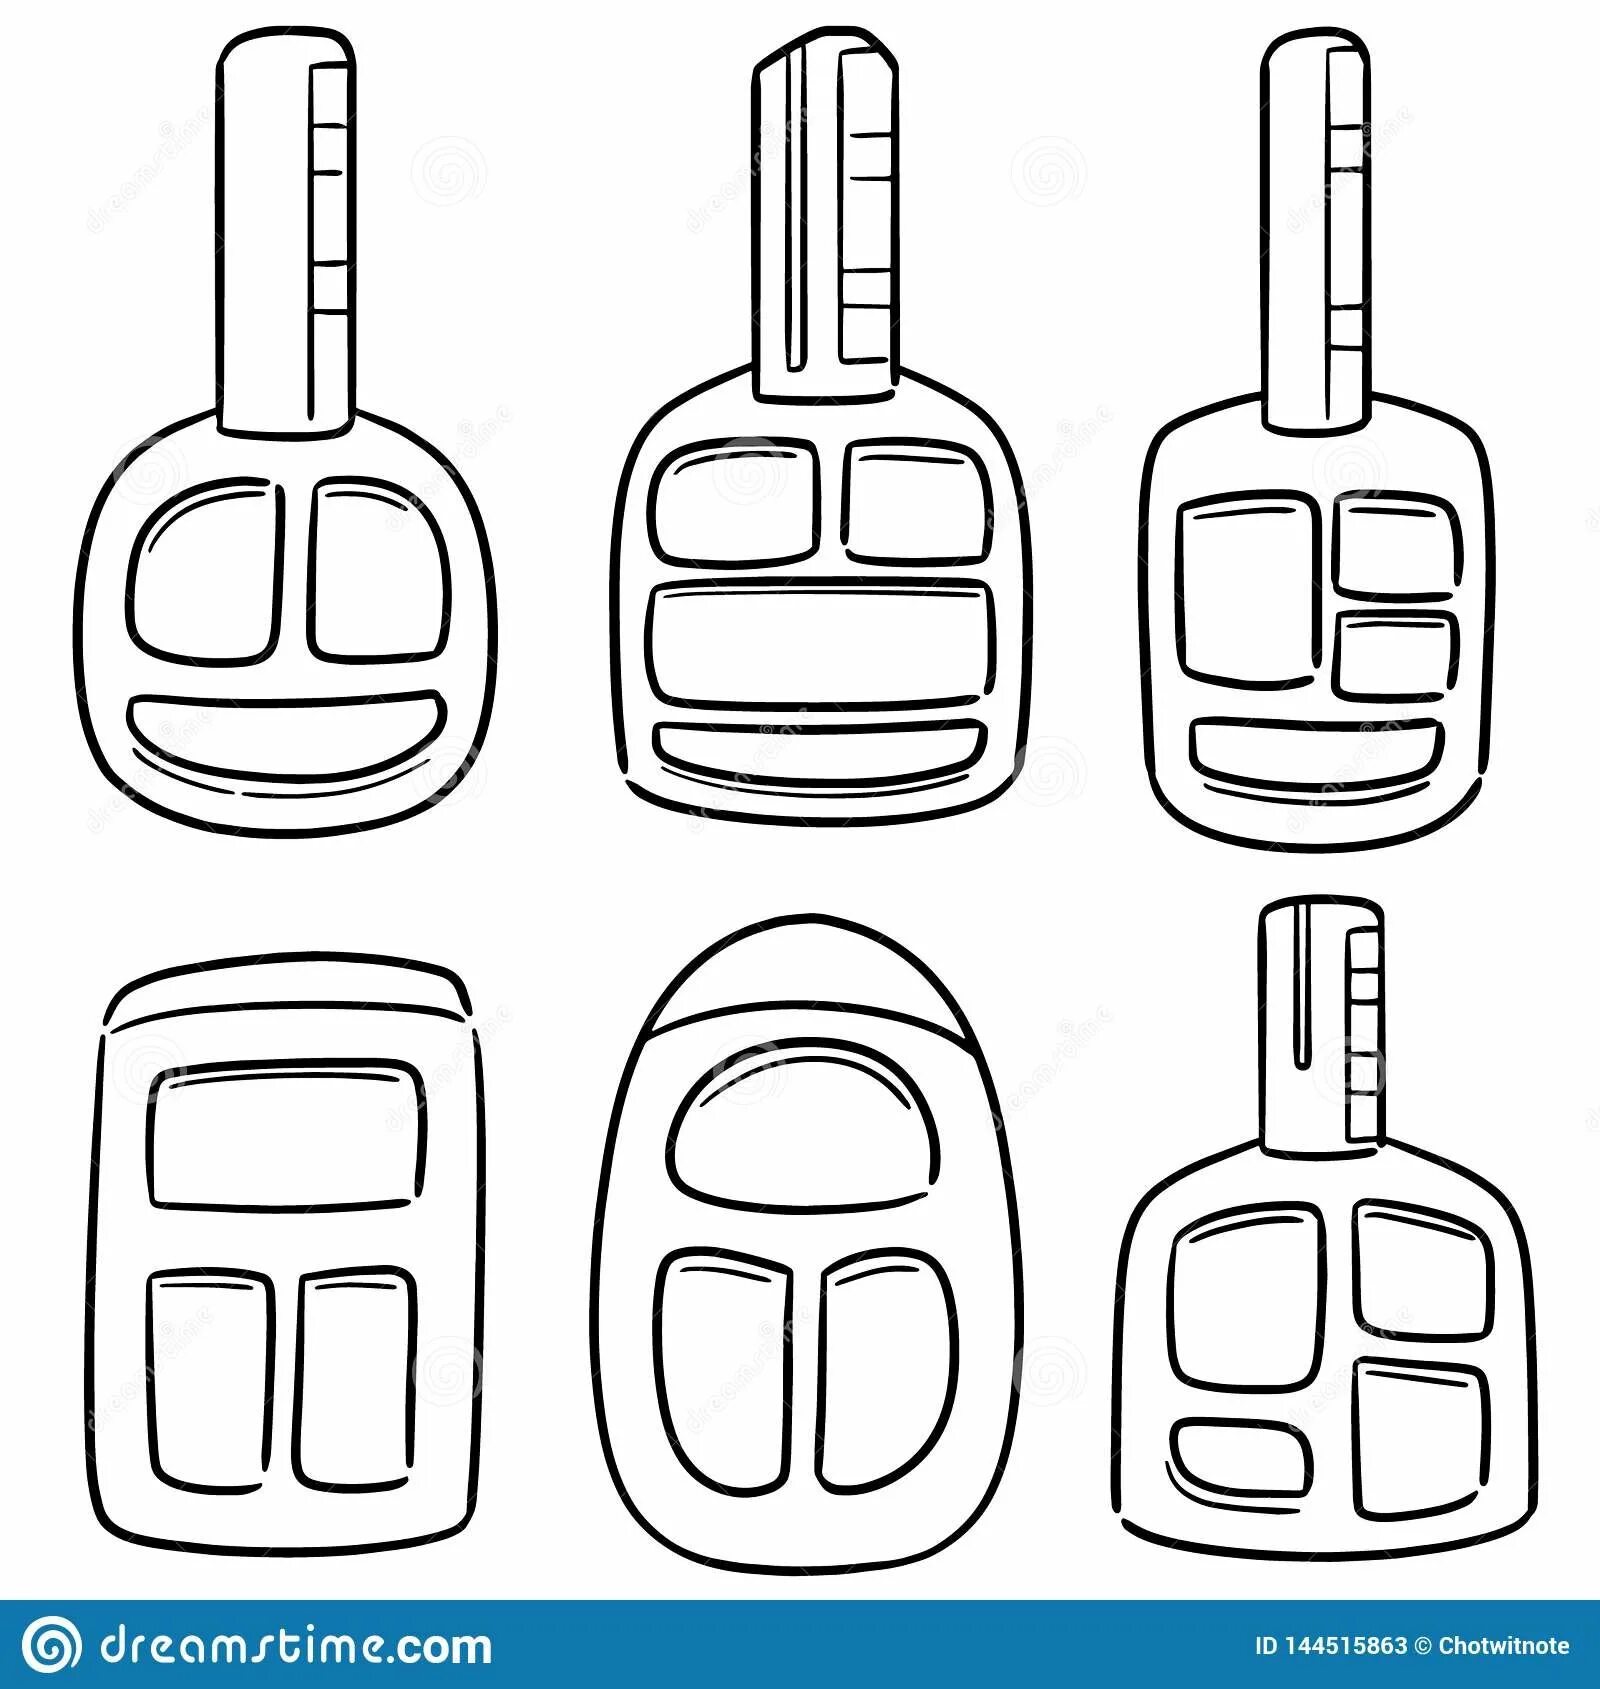 Playful car key coloring page